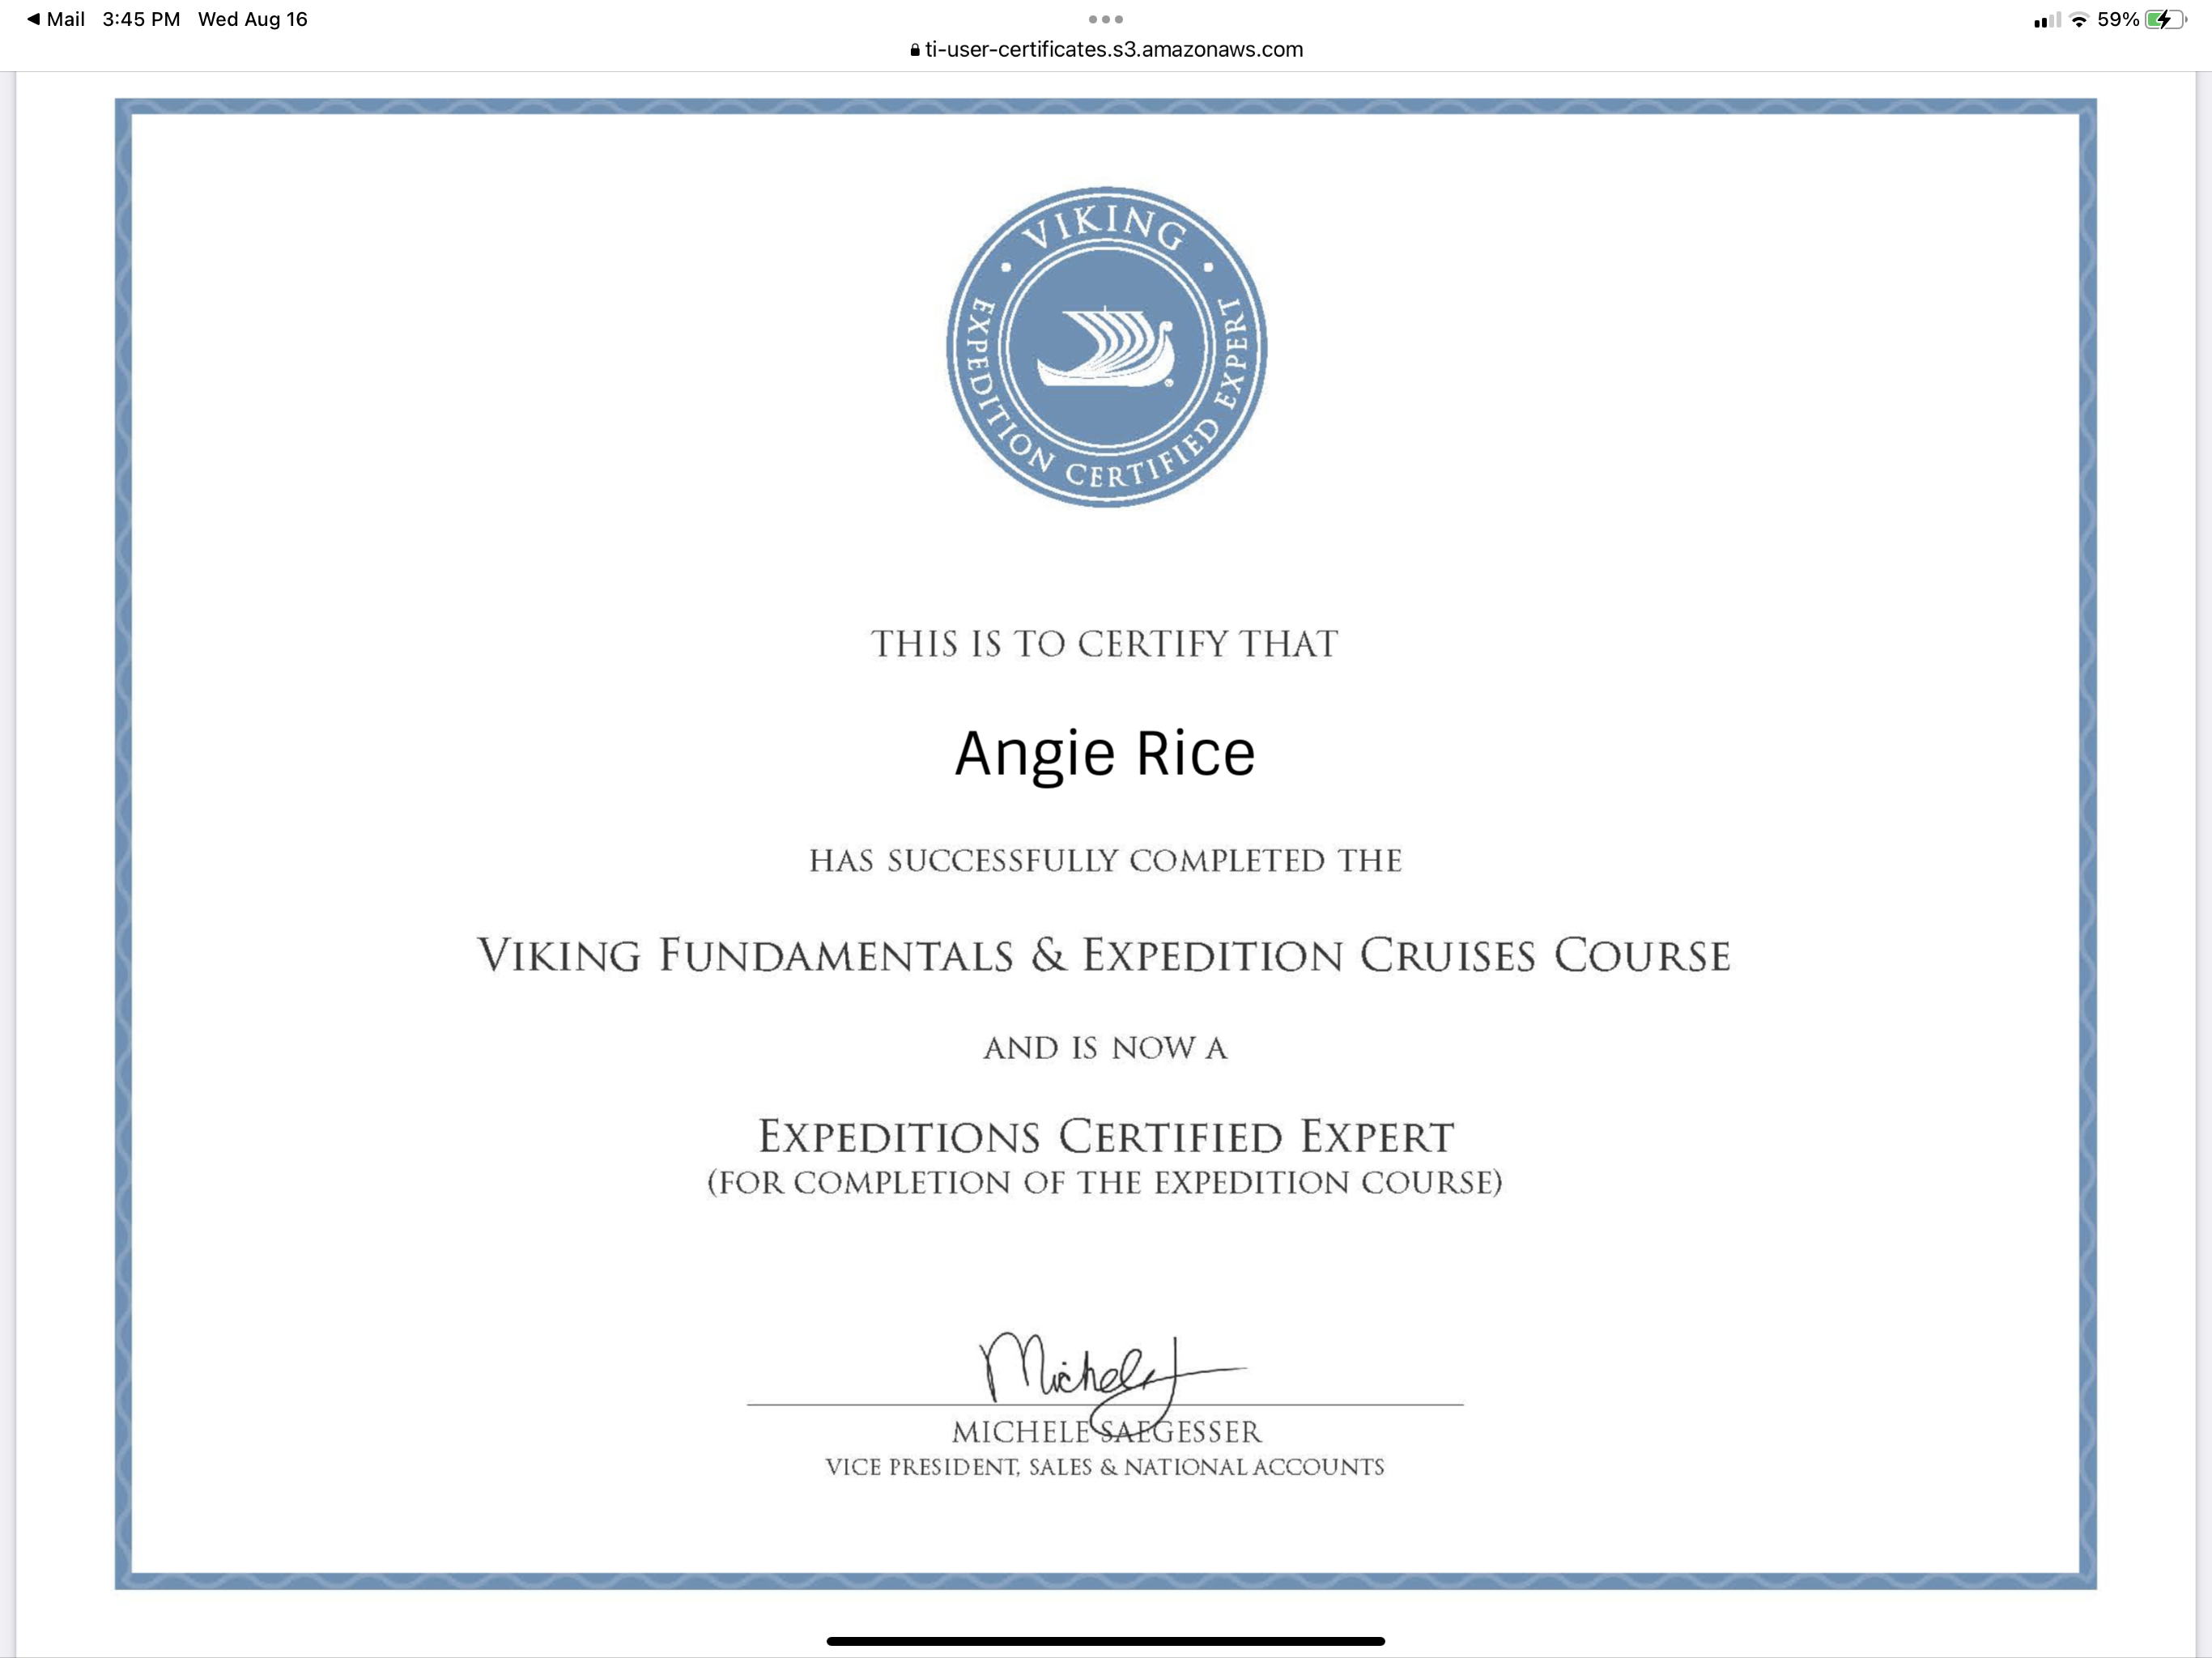 Viking Expeditions Certified Expert